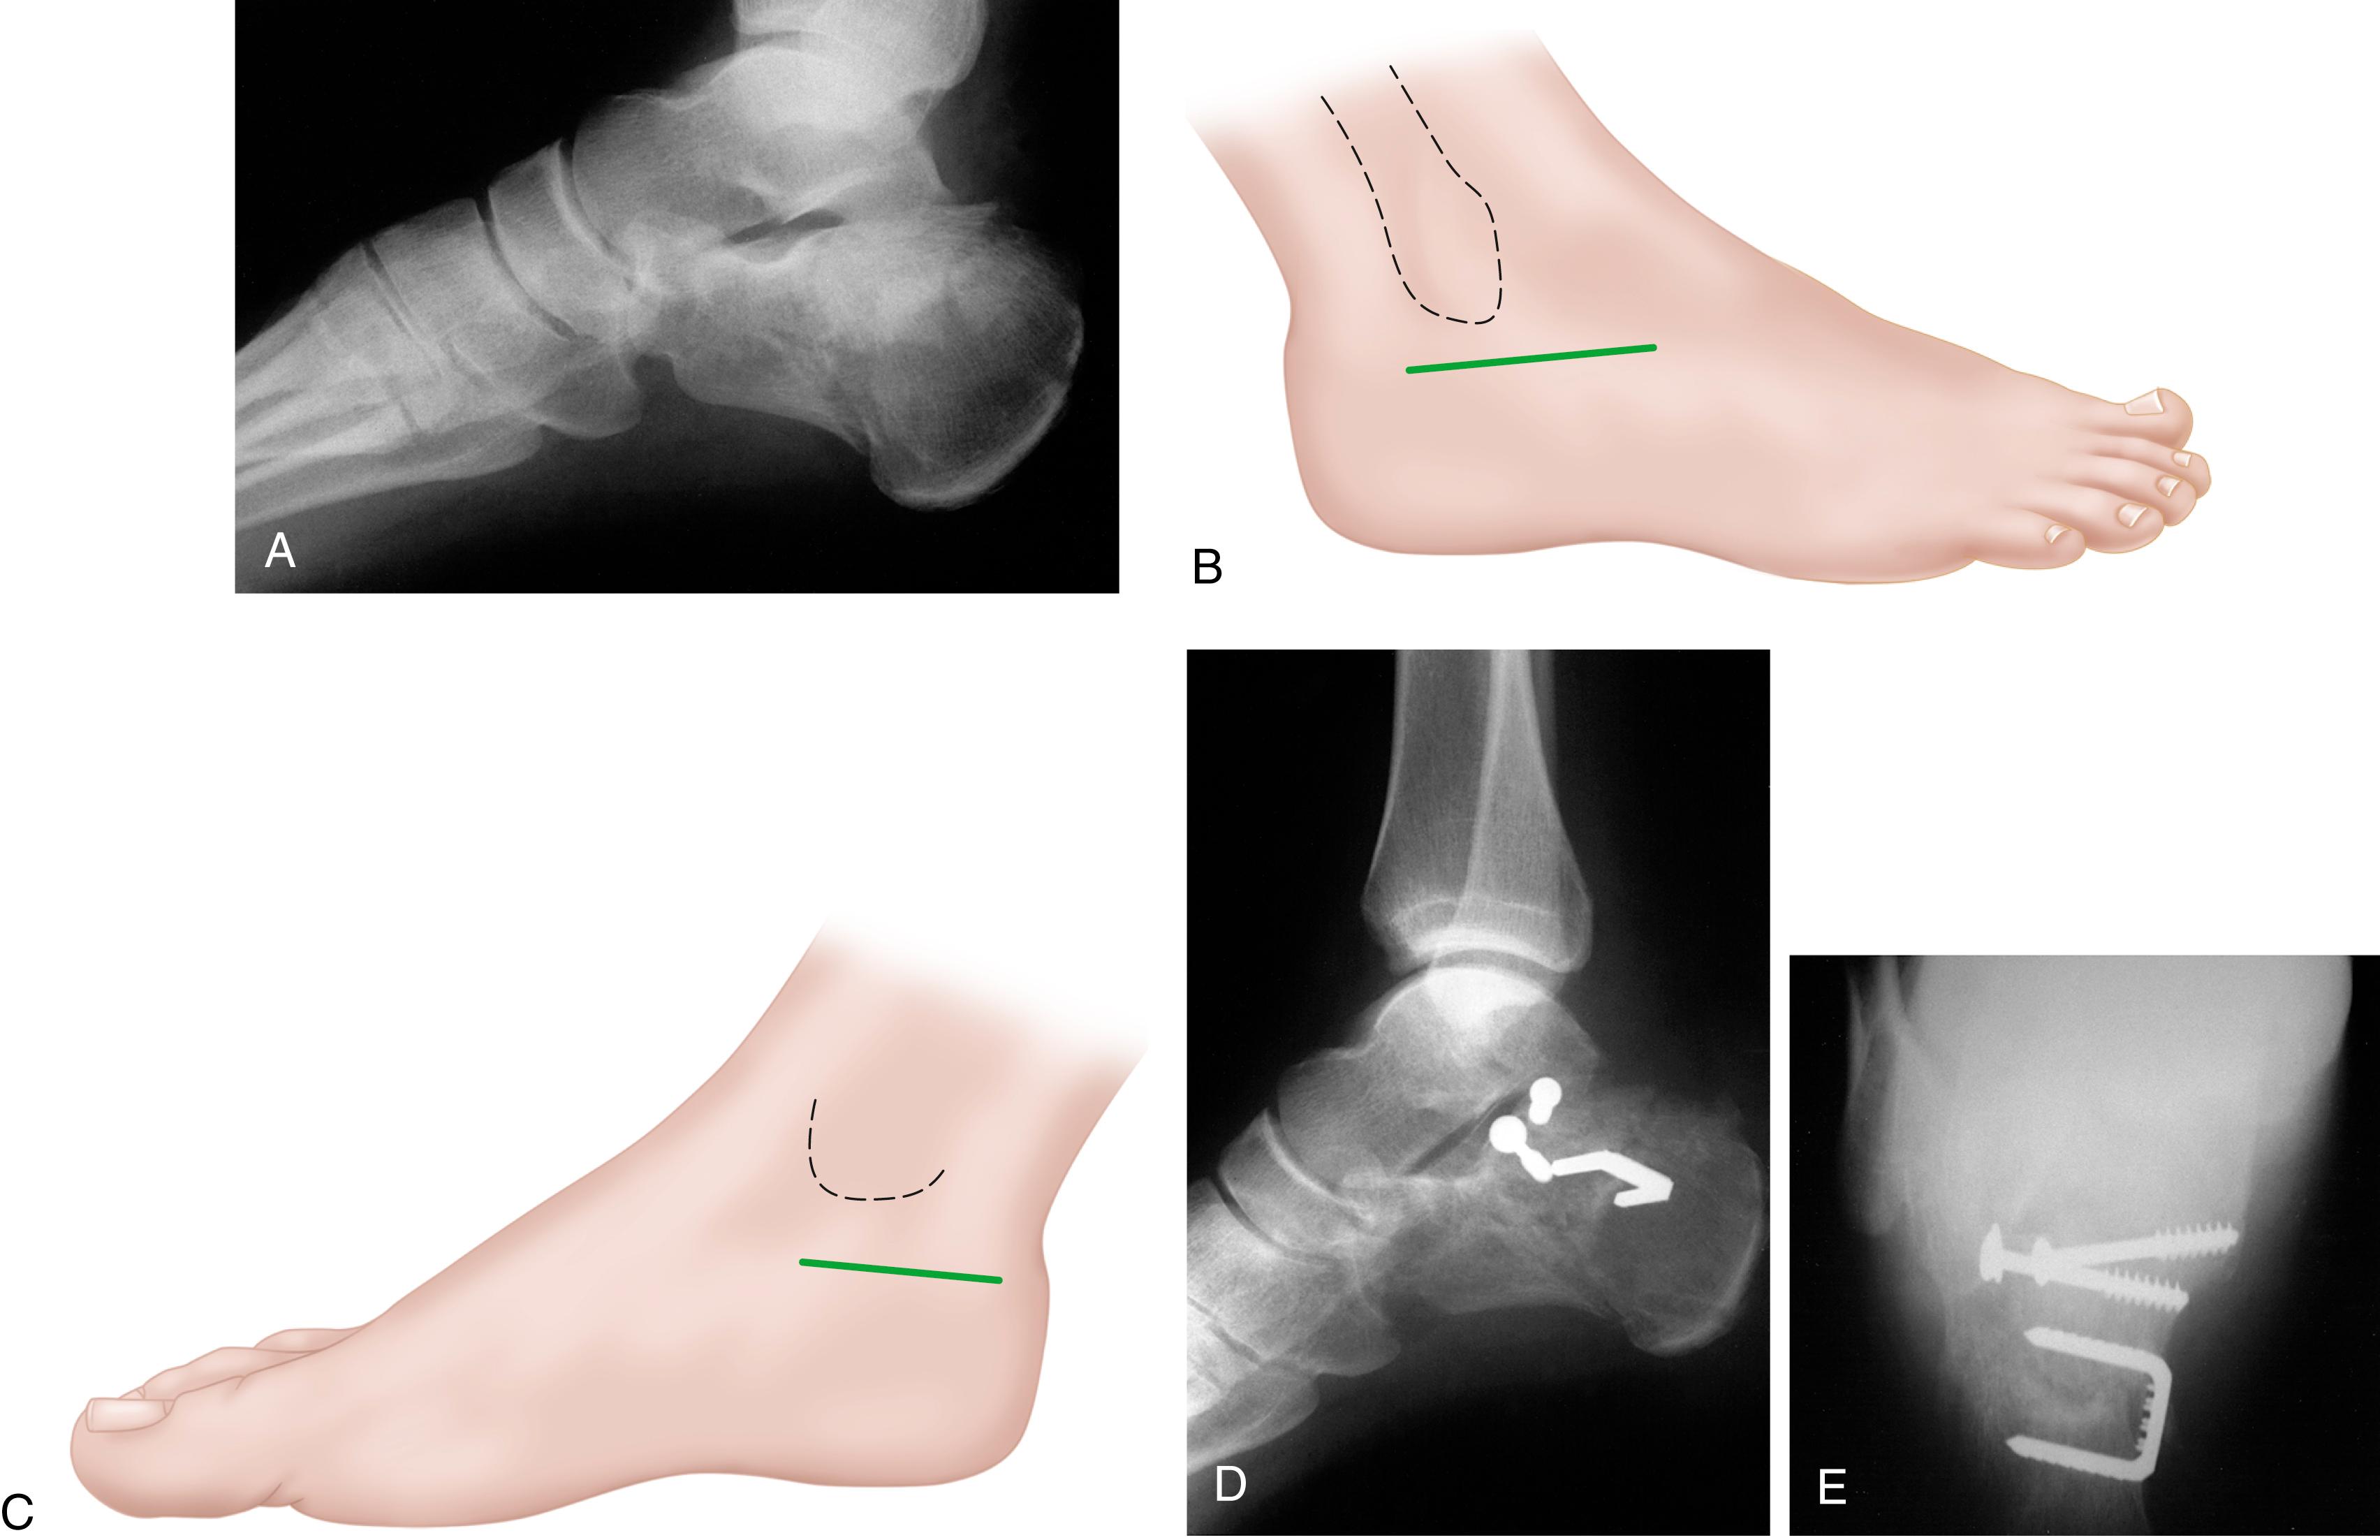 FIGURE 89.12, A, Preoperative radiograph. Medial and lateral incisions were chosen in this patient because of his significant smoking history. B, Lateral incision. C, Medial incision. D and E, Postoperative radiographs. SEE TECHNIQUE 89.3.